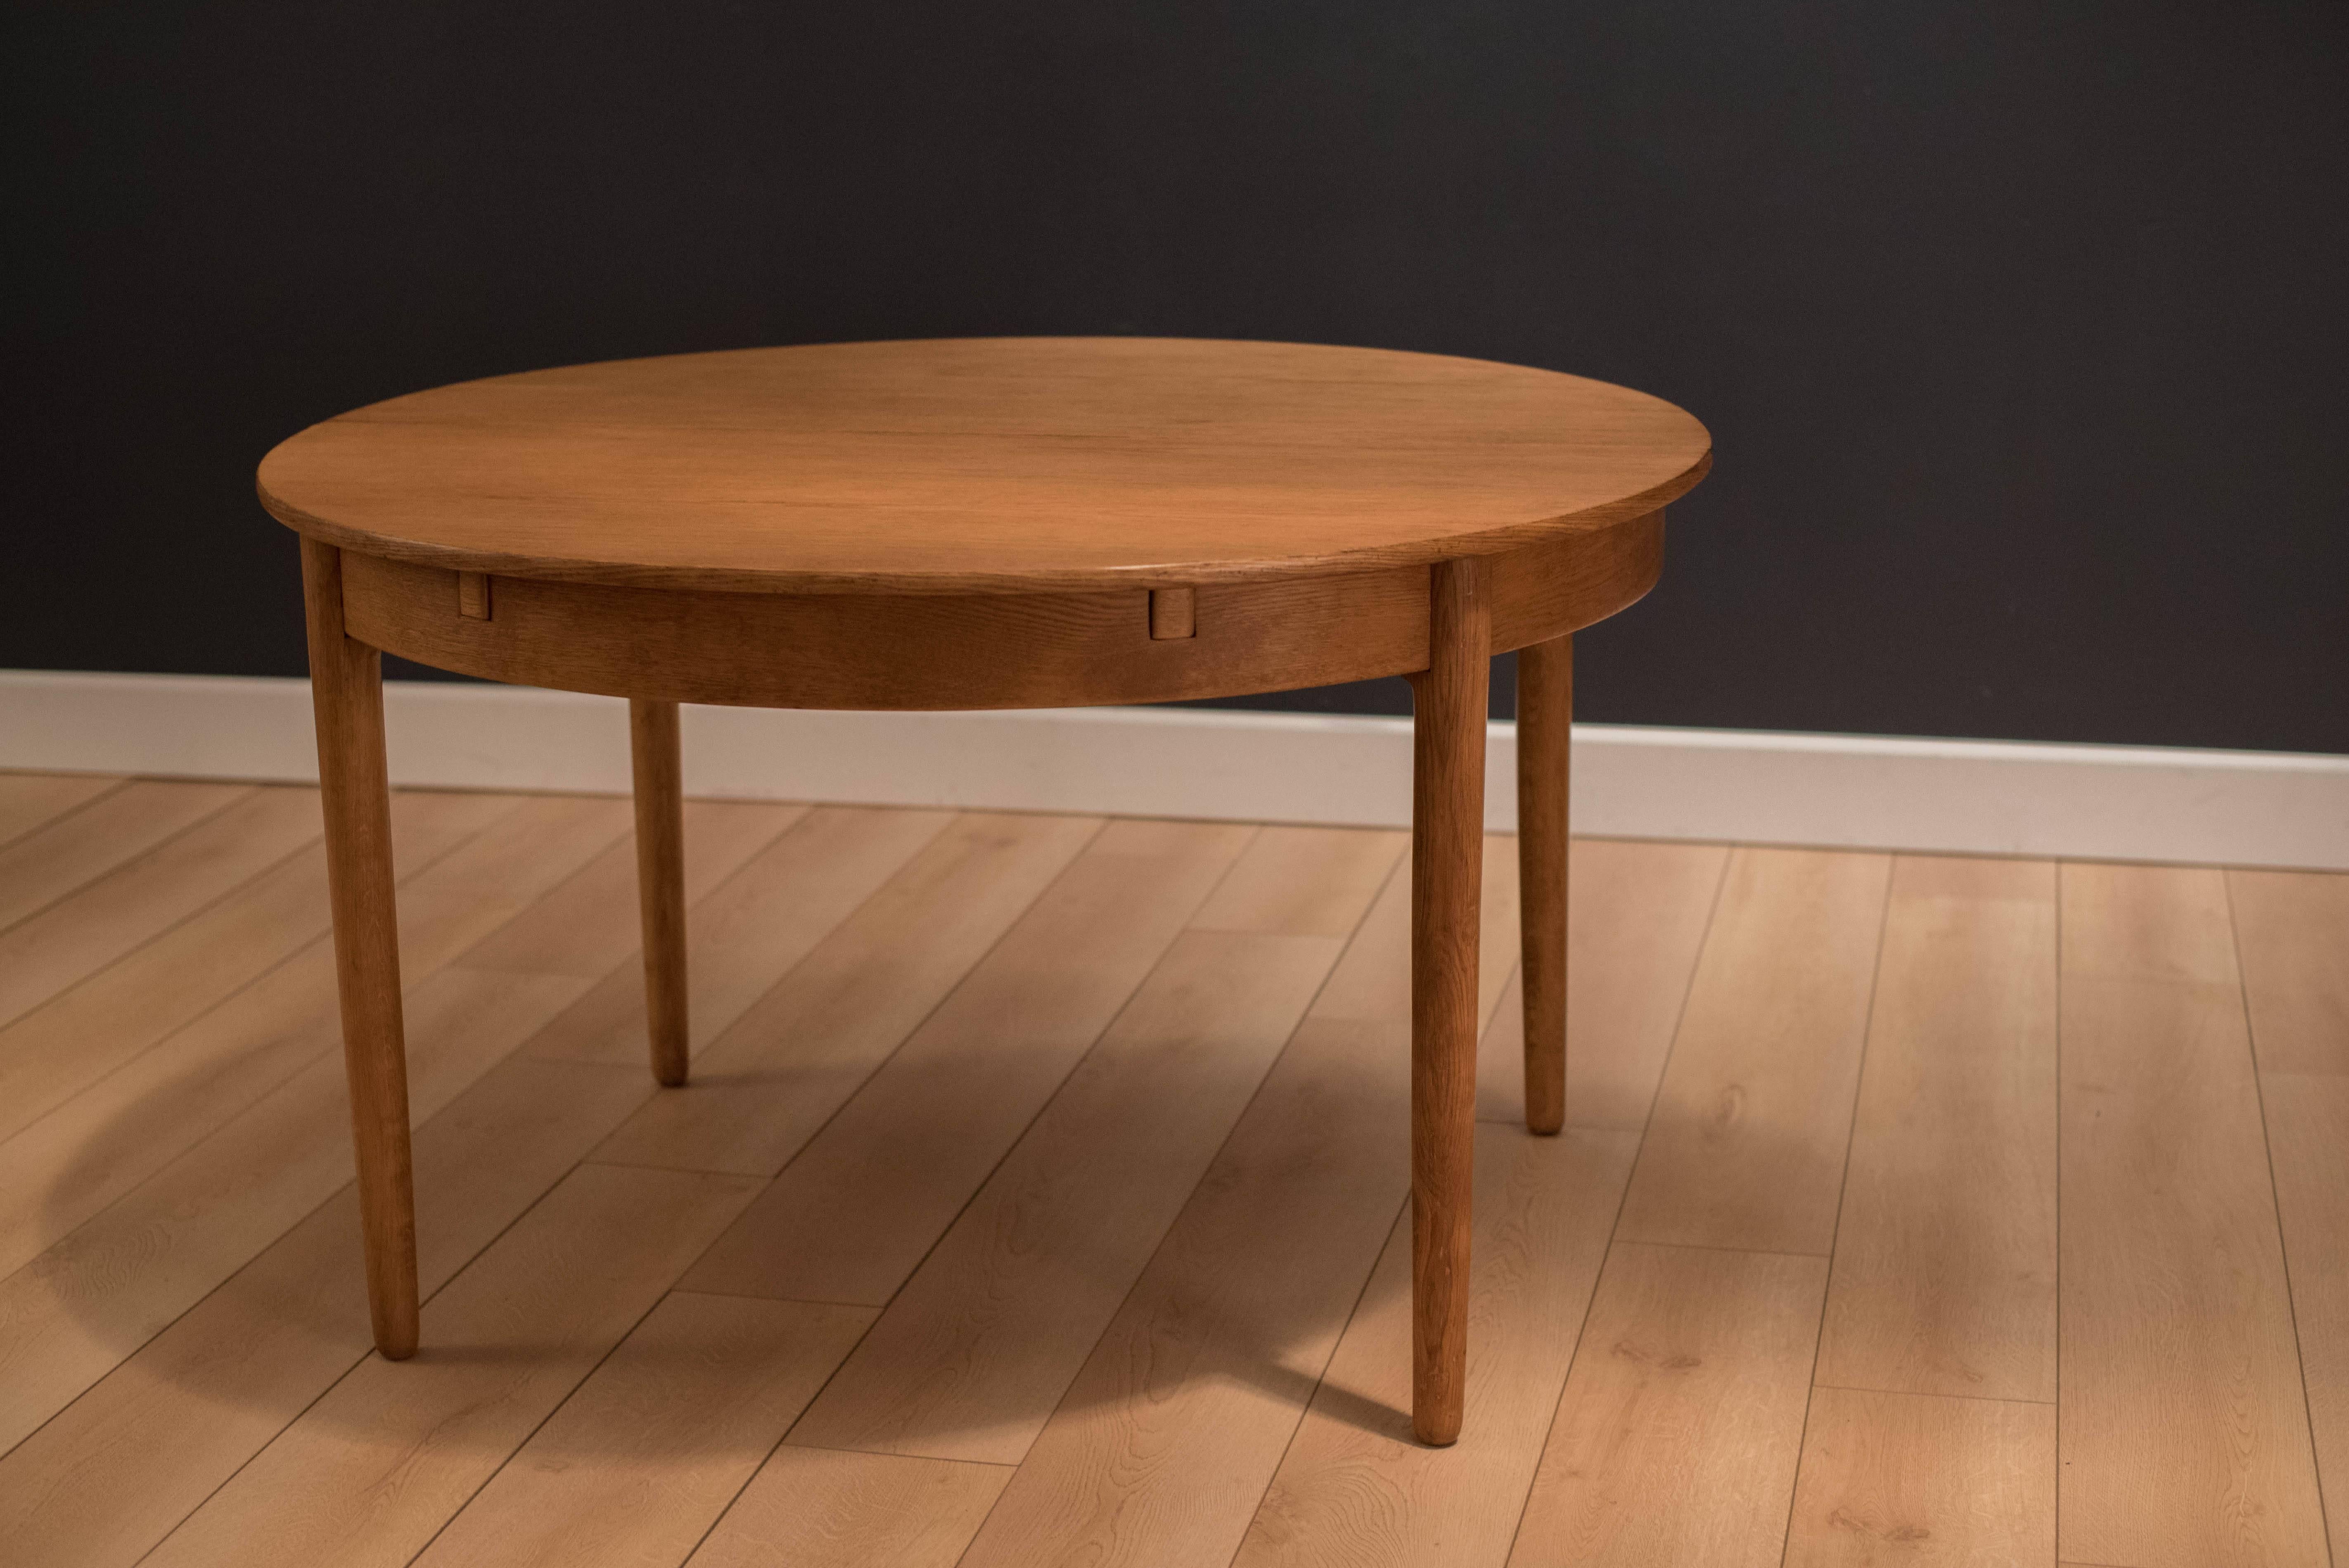 Mid Century Danish Dining Table designed by Hans Wegner for Andreas Tuck. This collectible piece displays excellent craftsmanship and is constructed of oak. Table comes with one extension leaf and is perfect for entertaining in small spaces. Extends